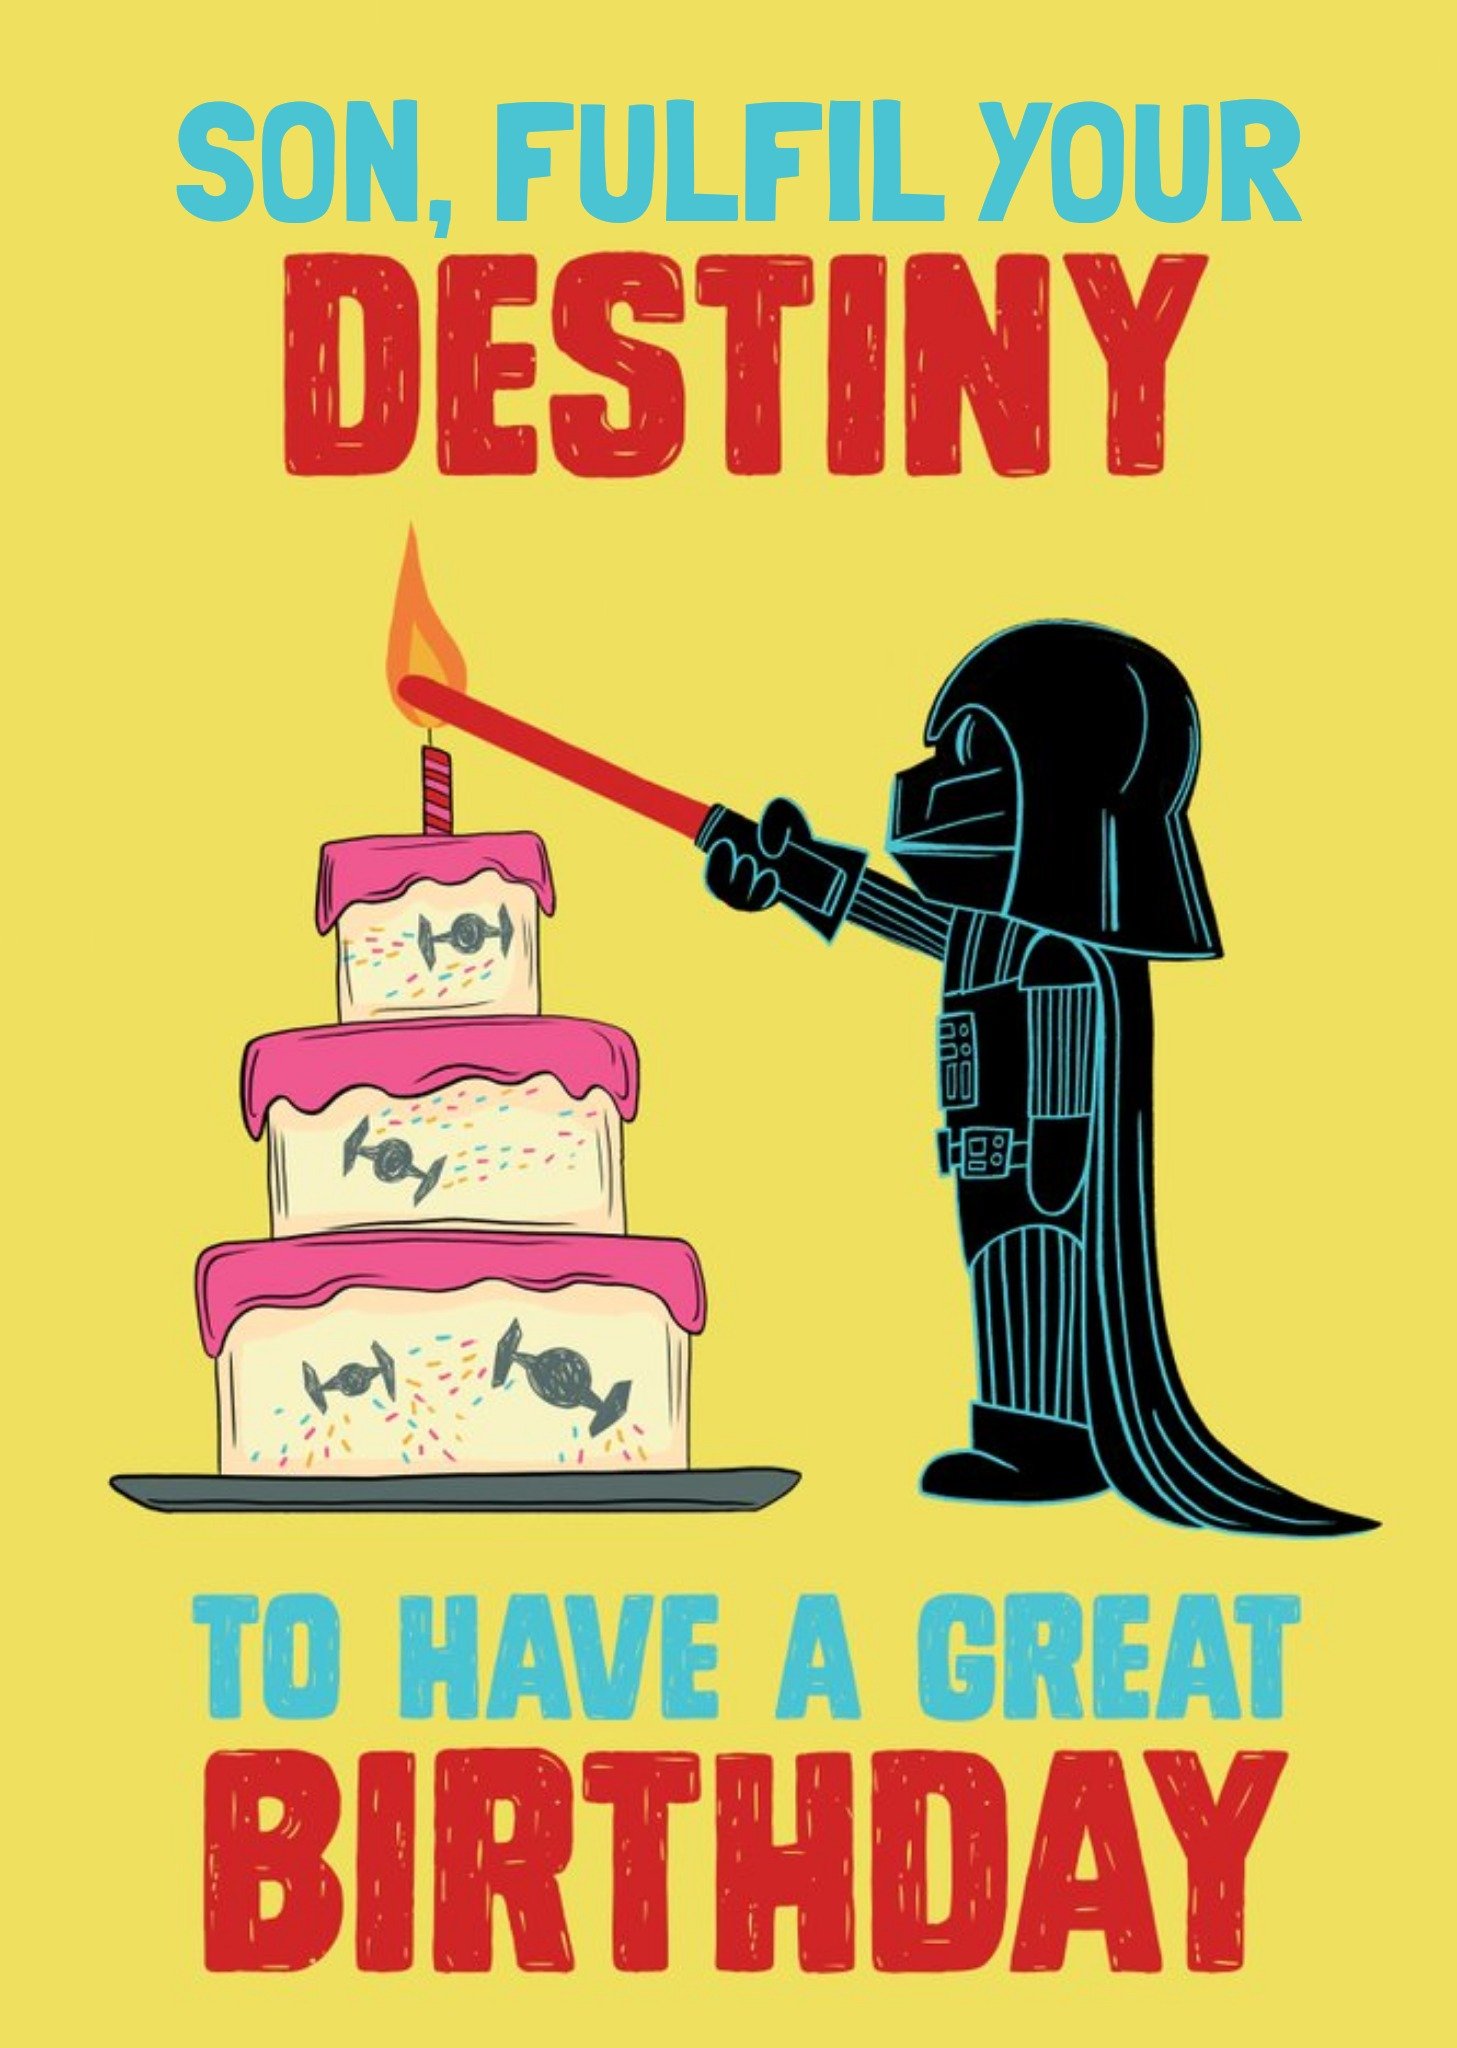 Disney Star Wars Darth Vader Birthday Card For Your Son, Large